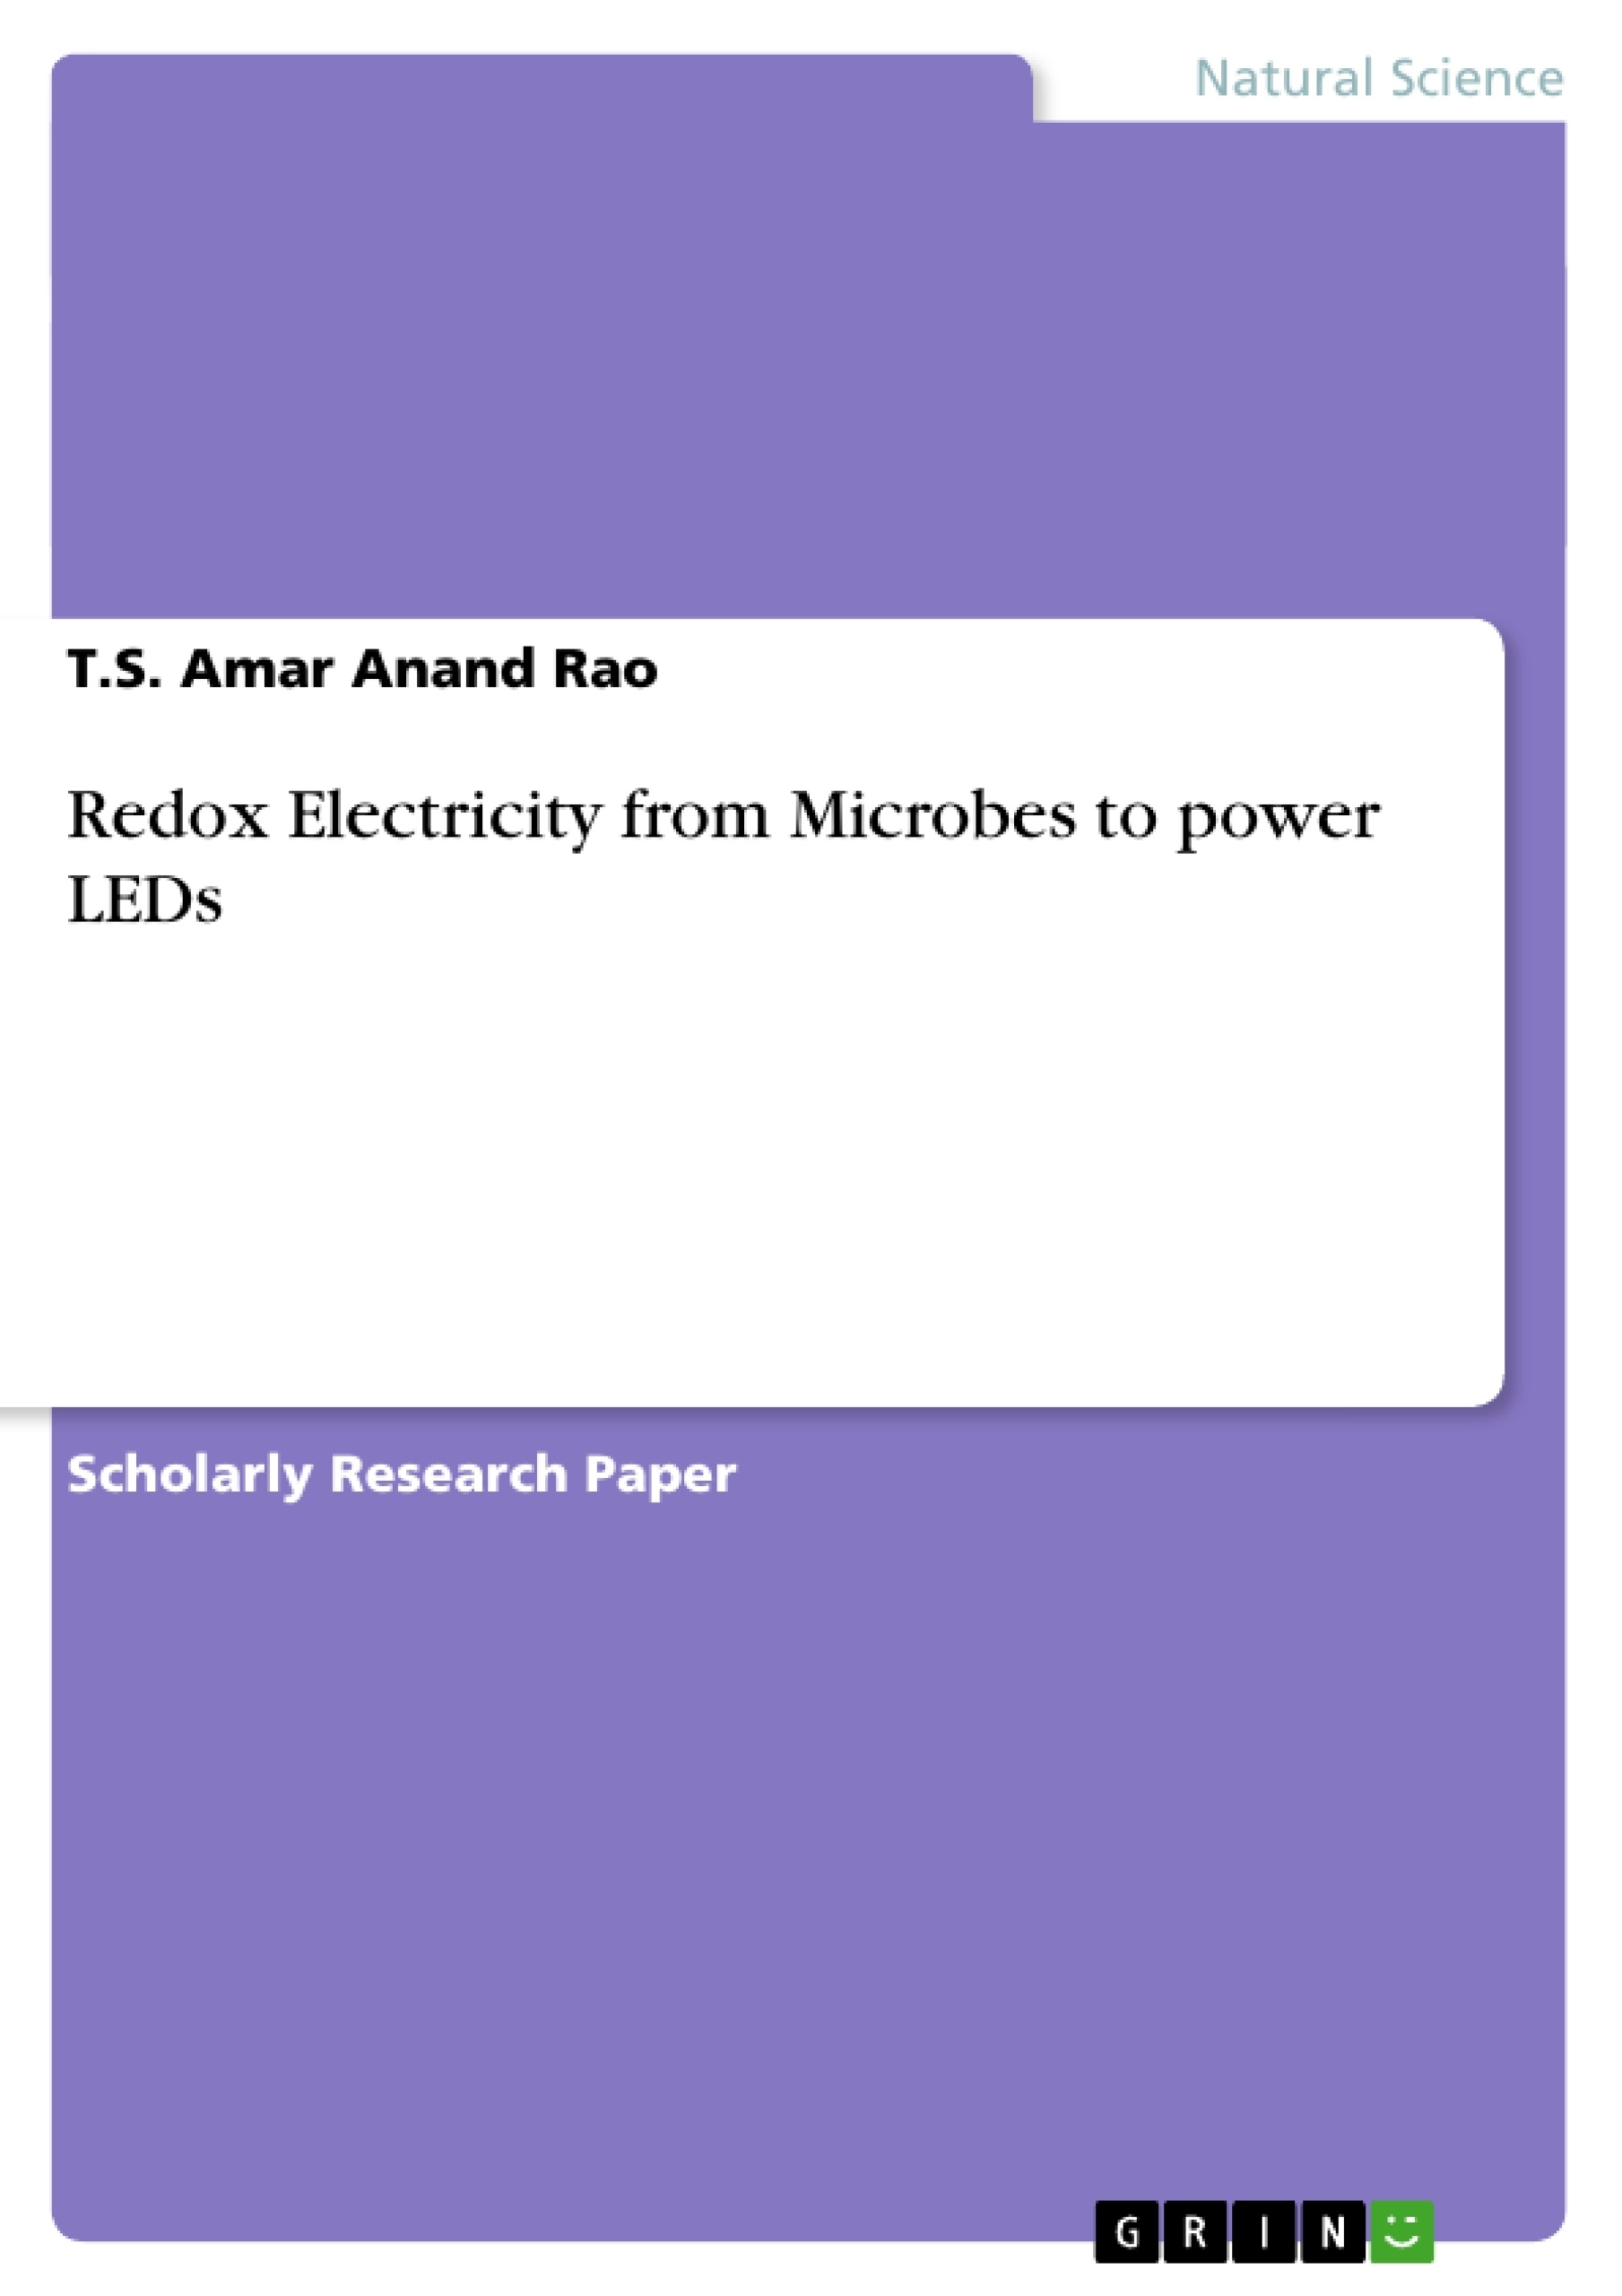 Titel: Redox Electricity from Microbes to power LEDs